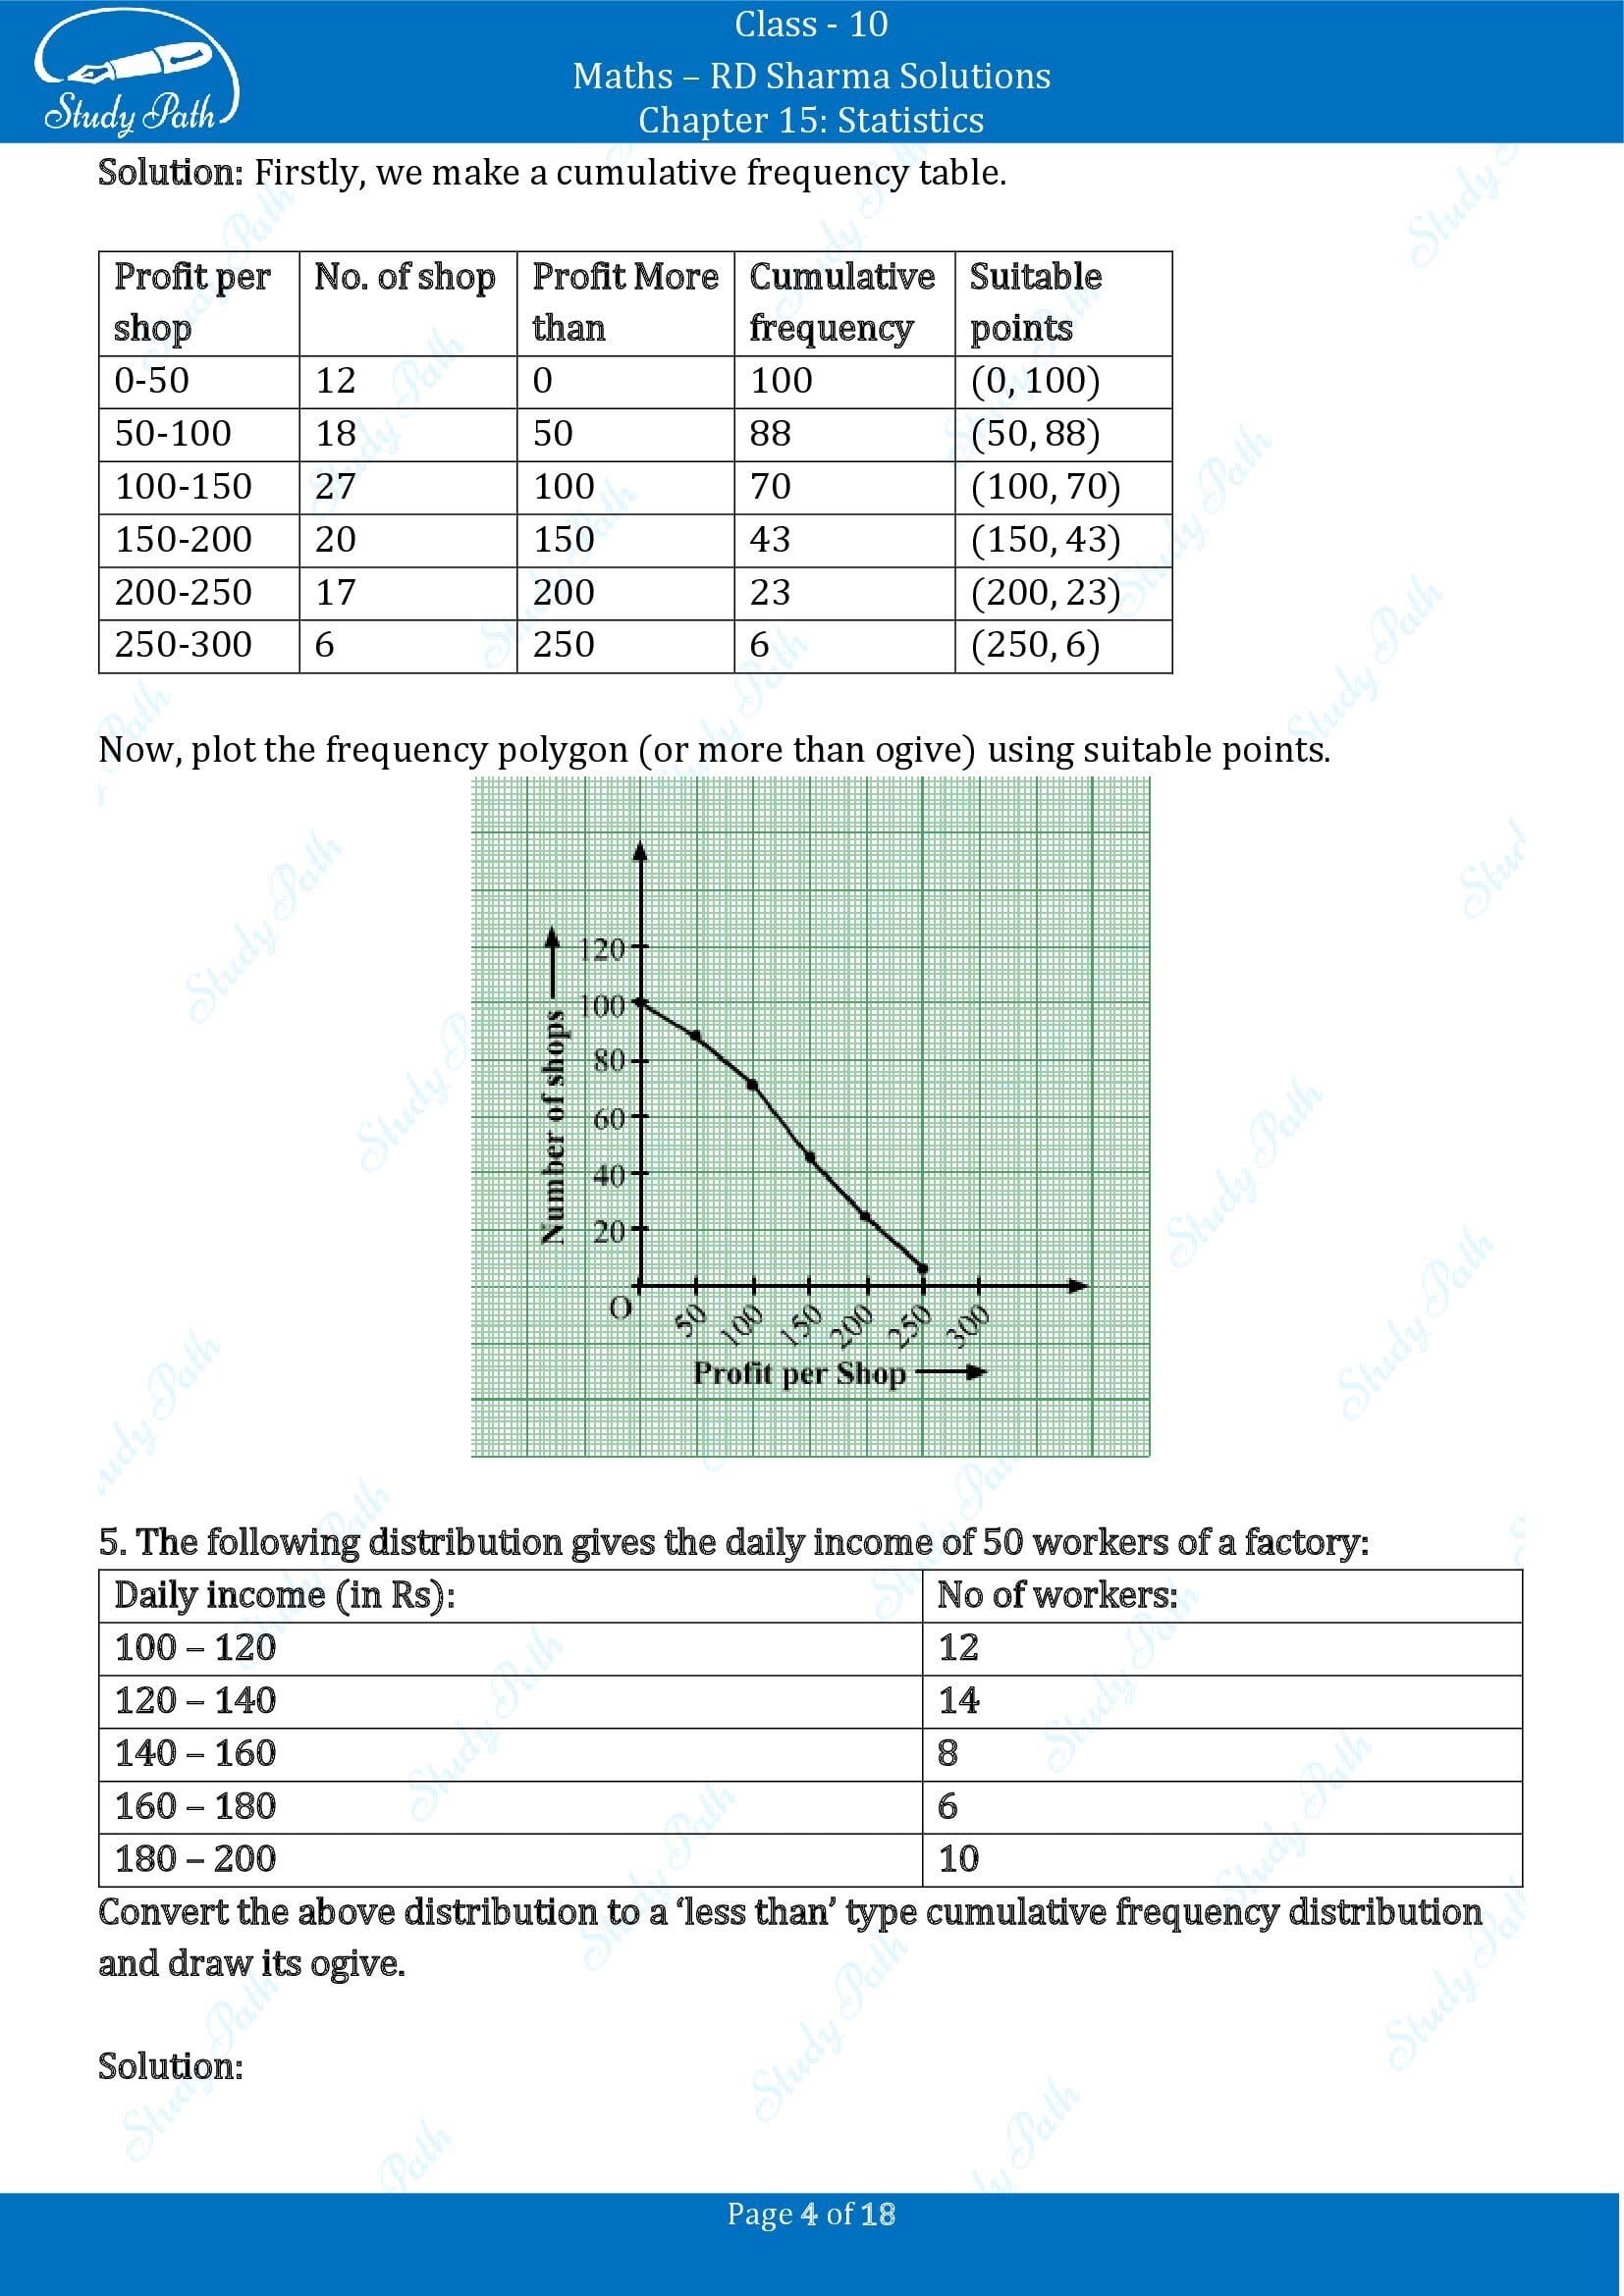 RD Sharma Solutions Class 10 Chapter 15 Statistics Exercise 15.6 00004